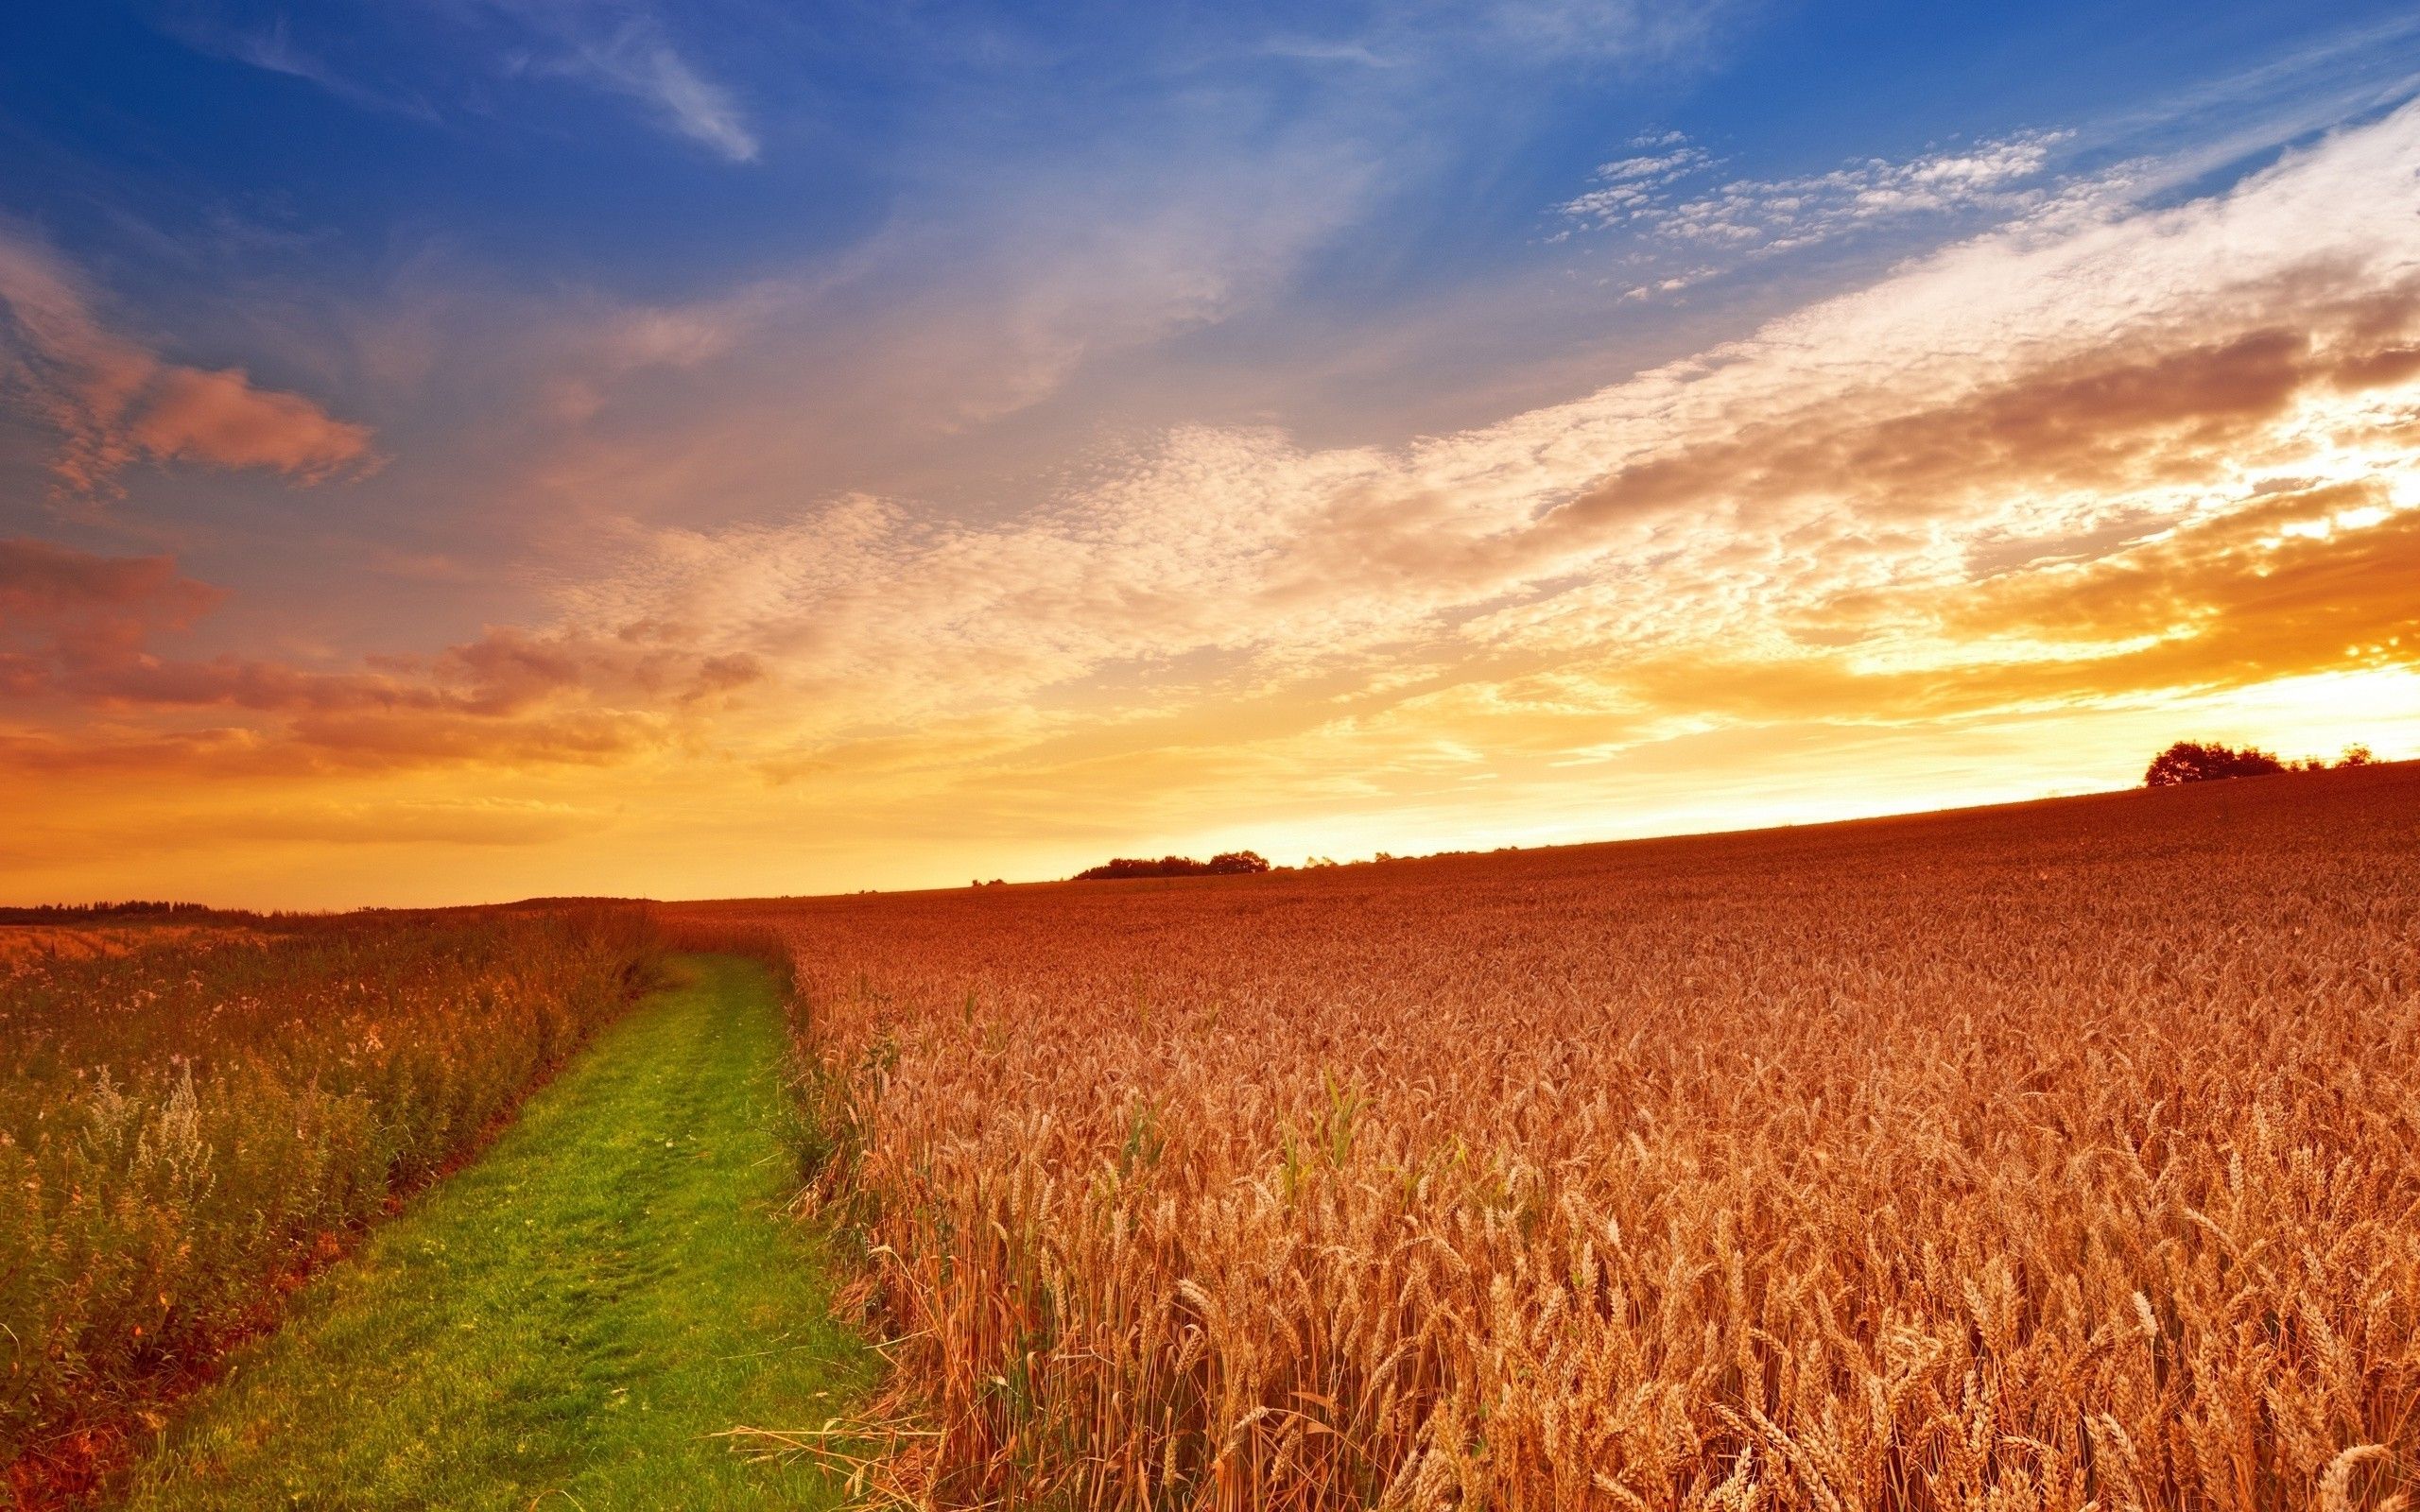 A field of wheat with the sun setting - Farm